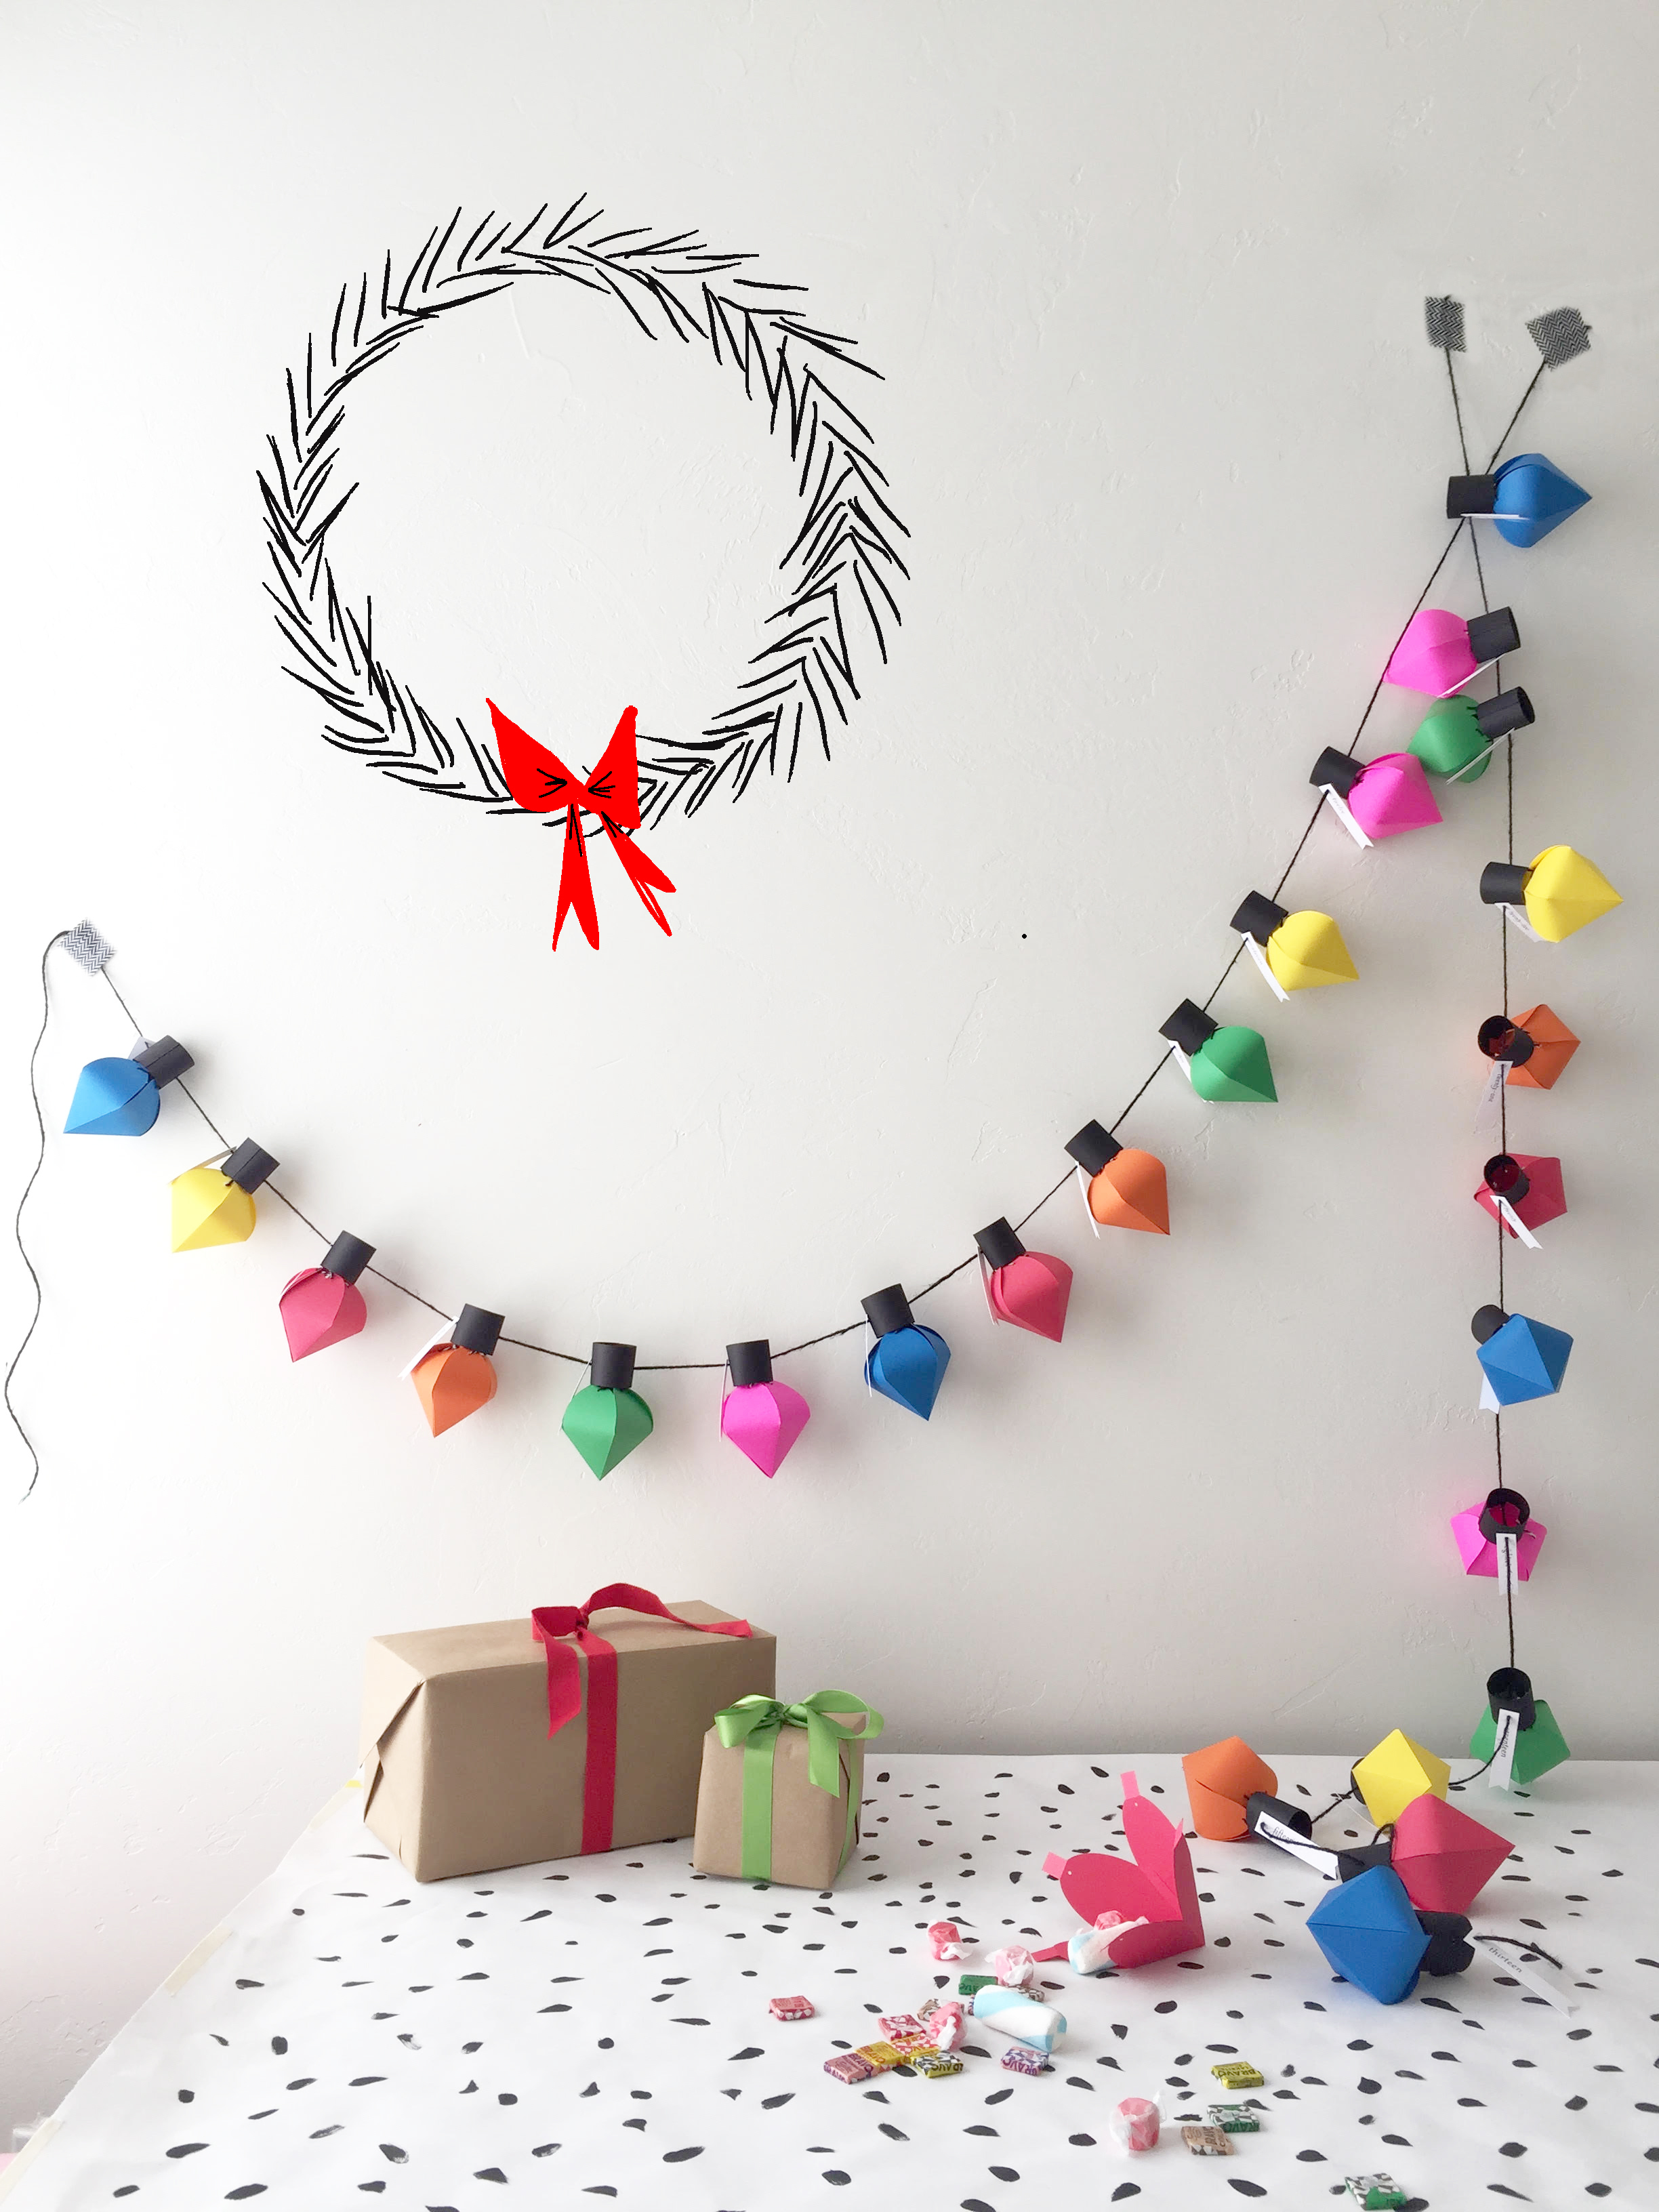 Advent wreath style with colourful paper light banner.